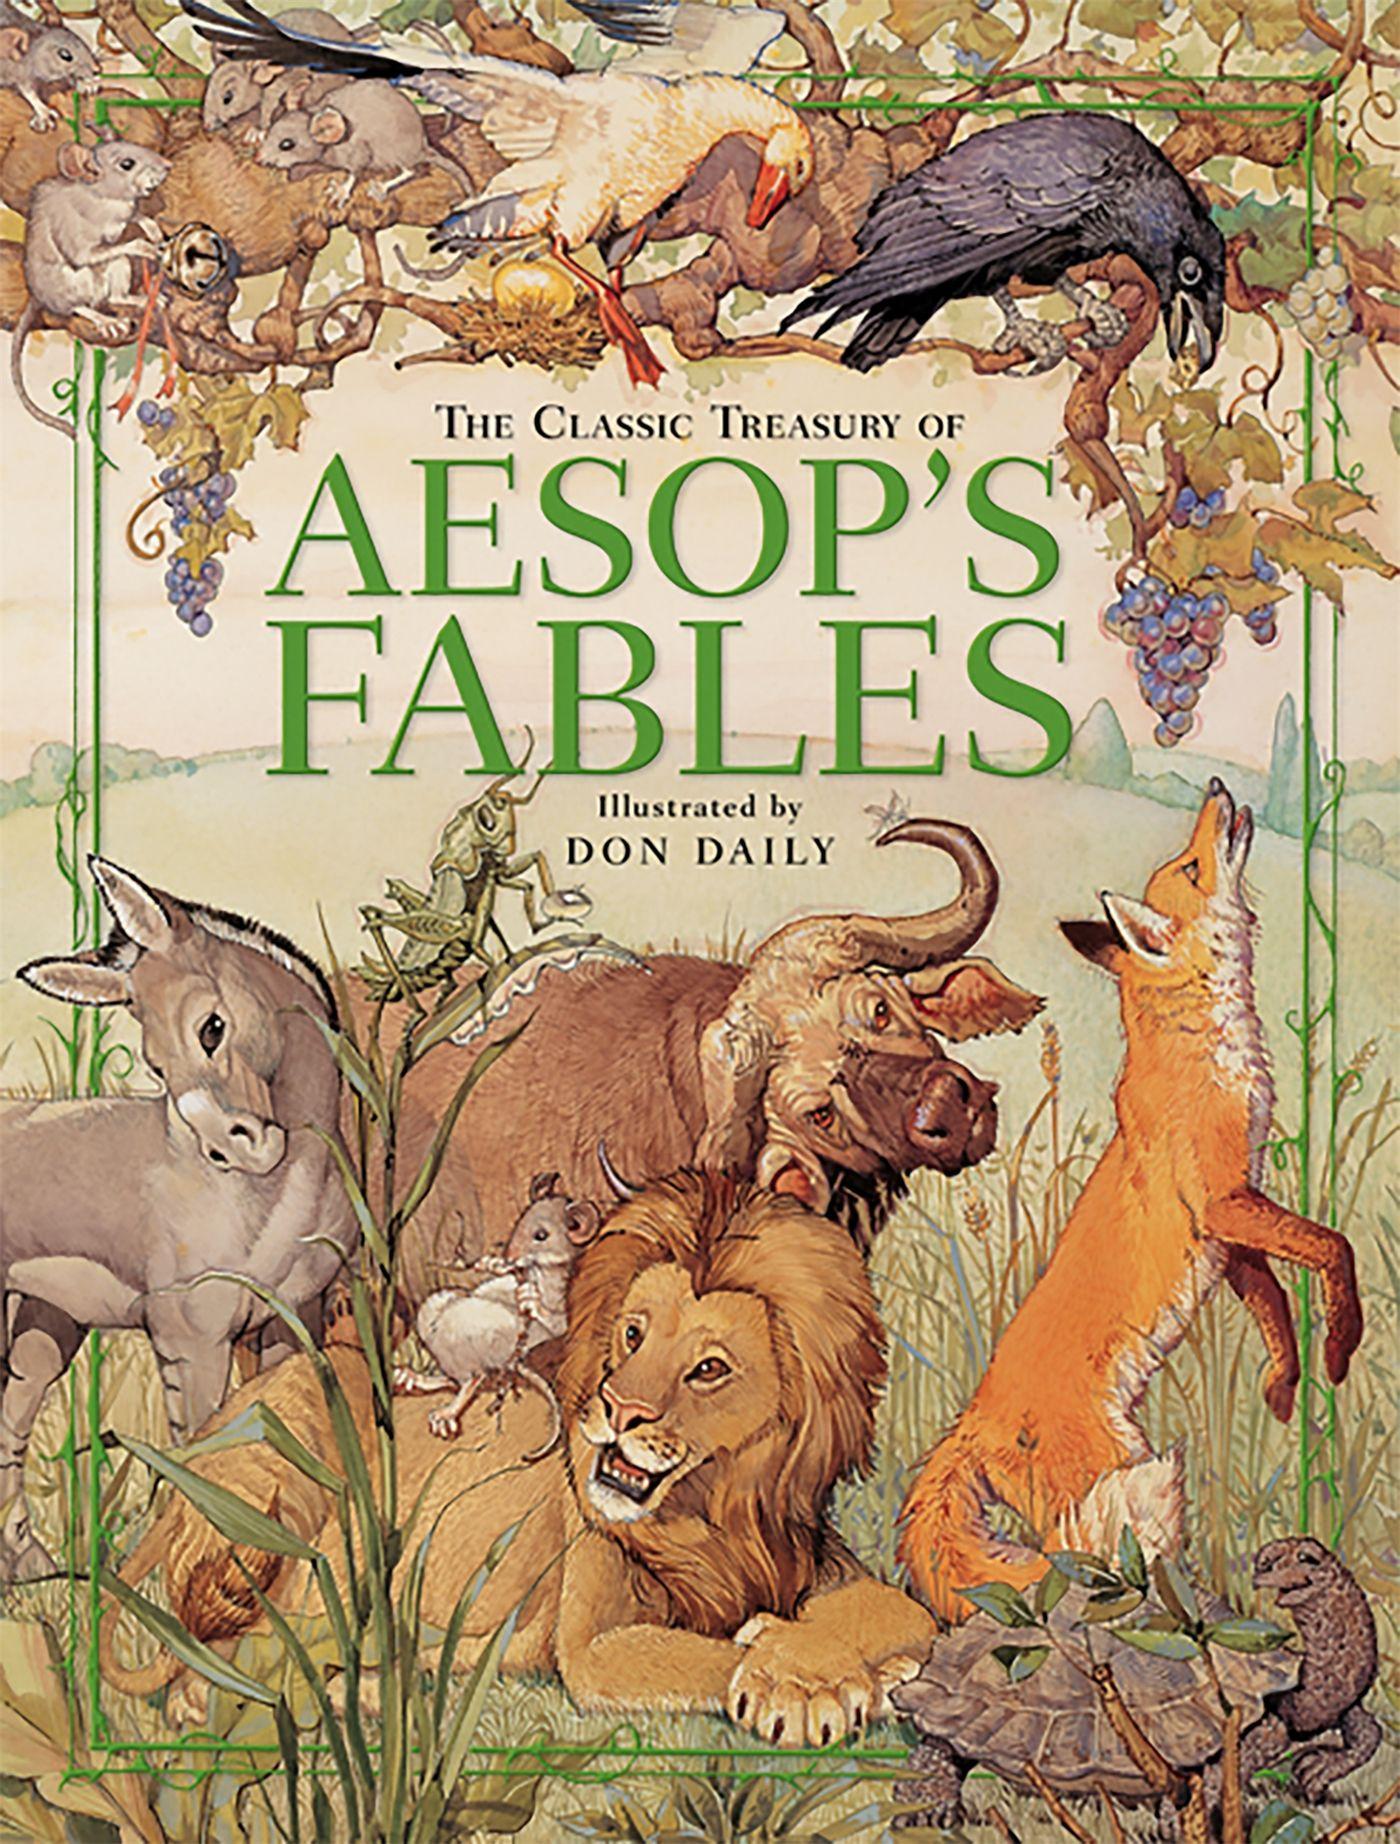 The Classic Treasury Of Aesop's Fables / Don Daily / Buch / Gebunden / Englisch / 2007 / Running Press,U.S. / EAN 9780762428762 - Daily, Don